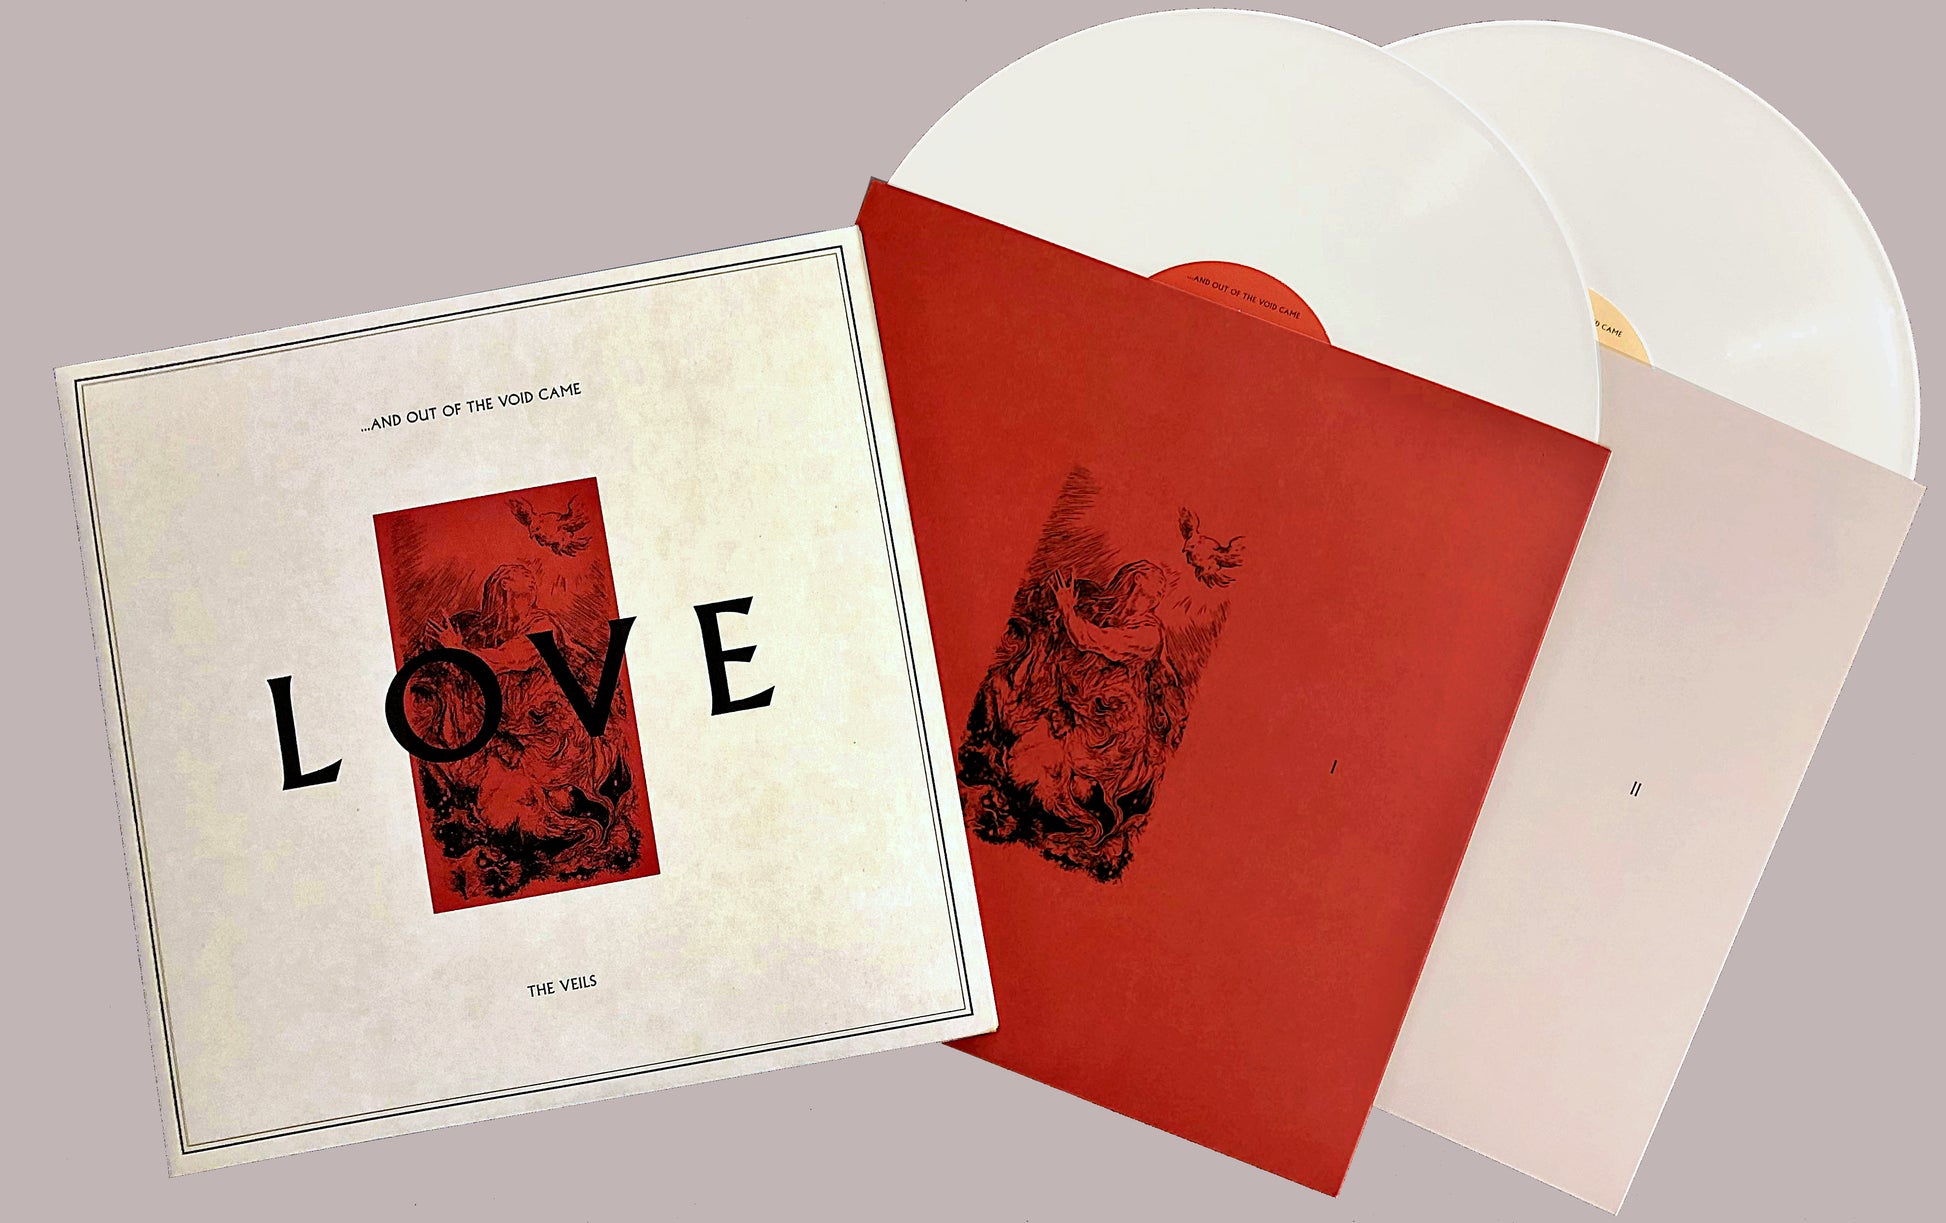 Arcade Sound - The Veils - ...And Out of the Void Came Love - 2x Col LP / 2x LP / CD image